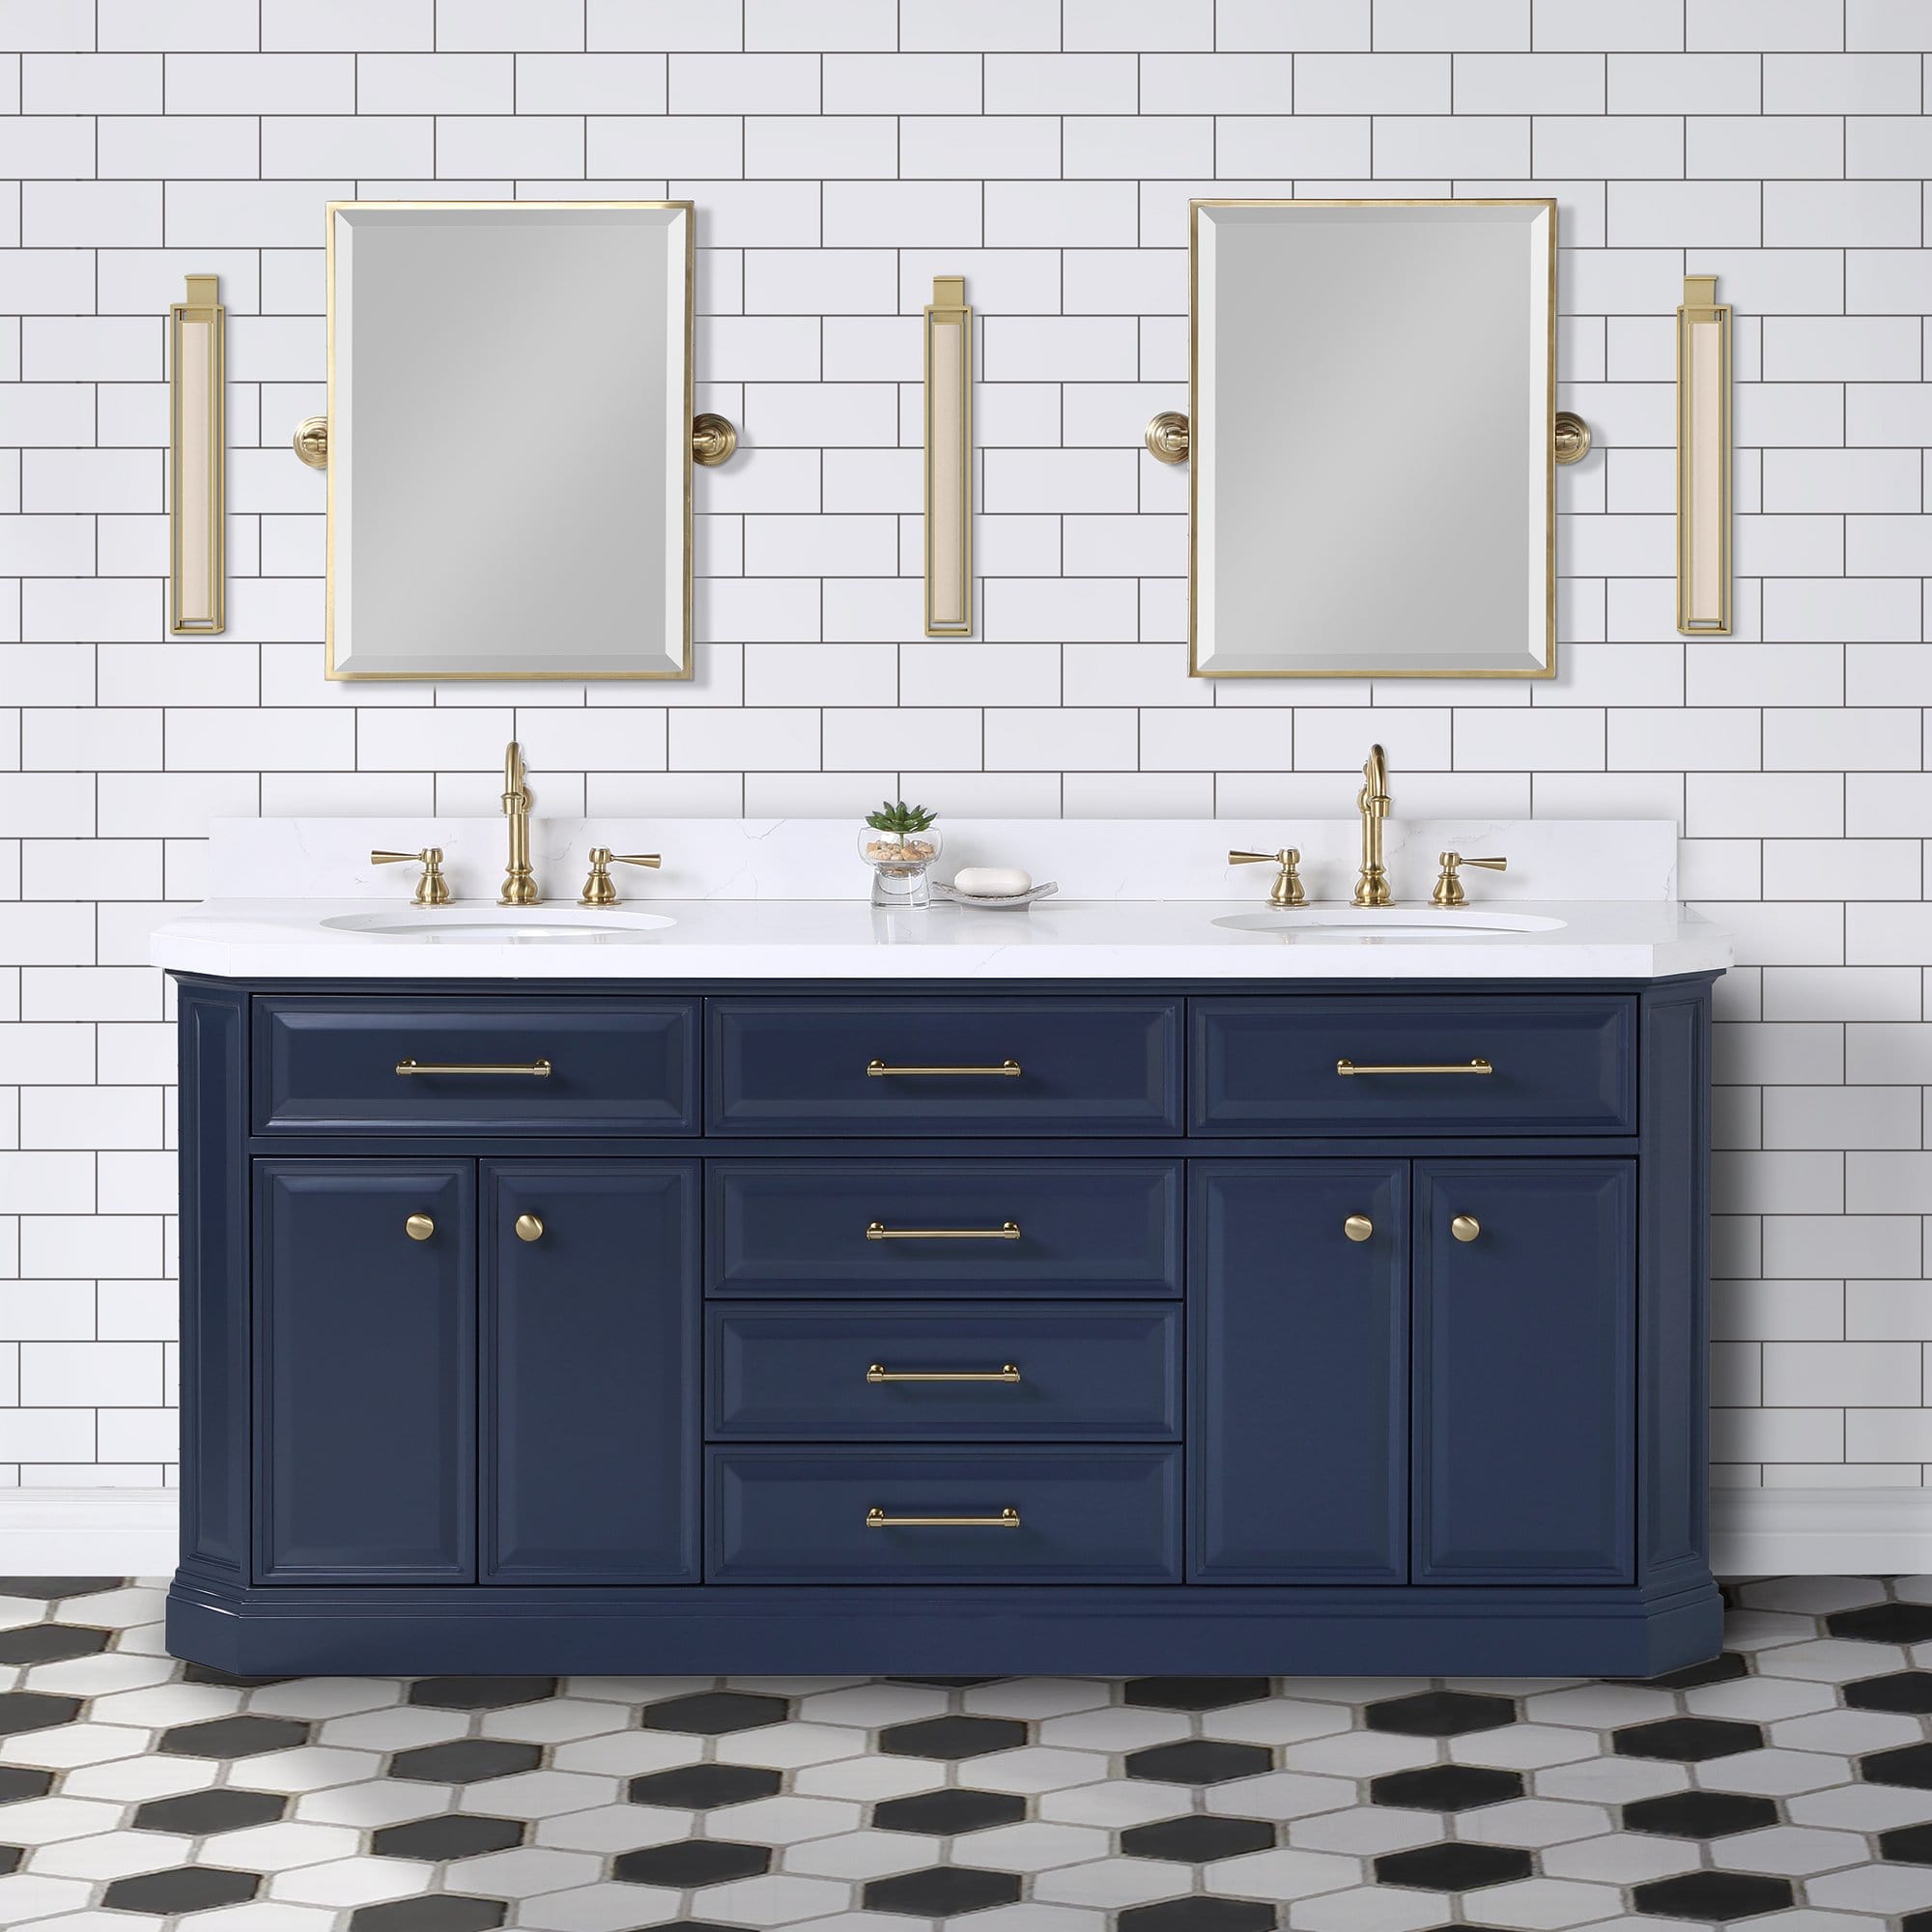 Water Creation Palace 72 In. Double Sink White Quartz Countertop Vanity in Monarch Blue with Hook Faucets - Molaix732030765054Bathroom vanityPA72QZ06MB-000TL1206